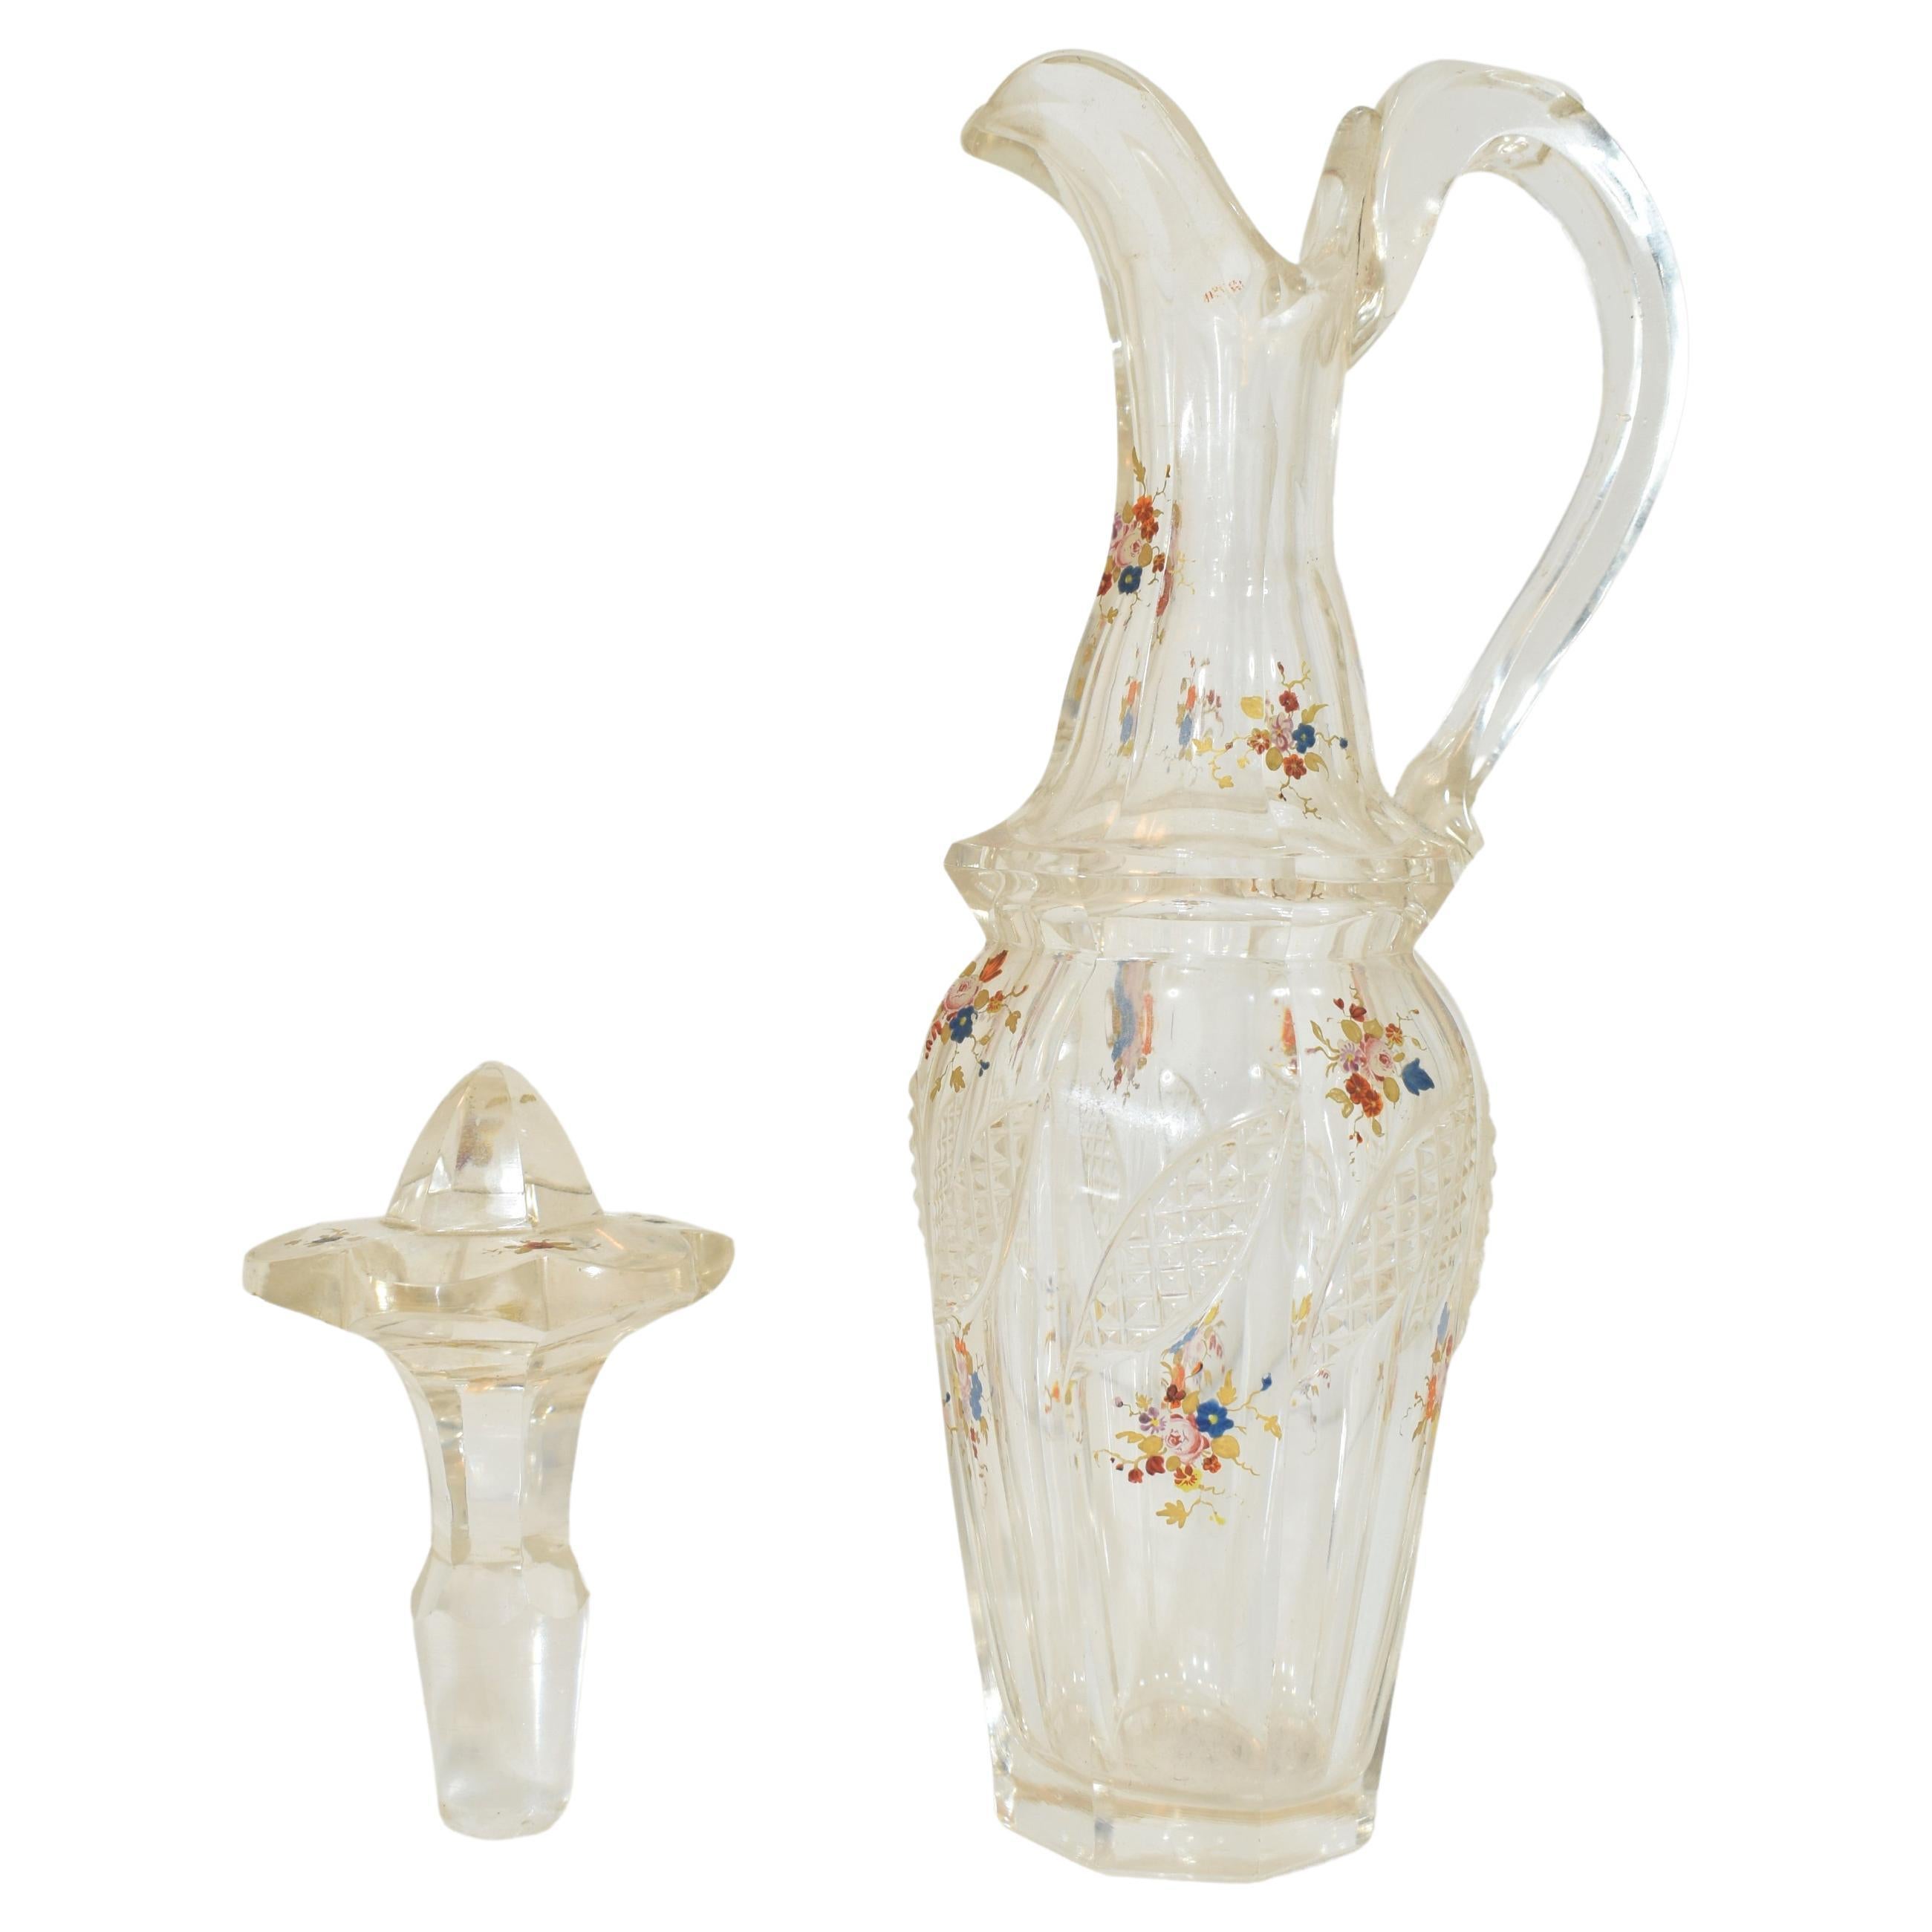 Antique Cut Glass and Metal Oil and Veniger Cruet Set, 19th Century For Sale 3